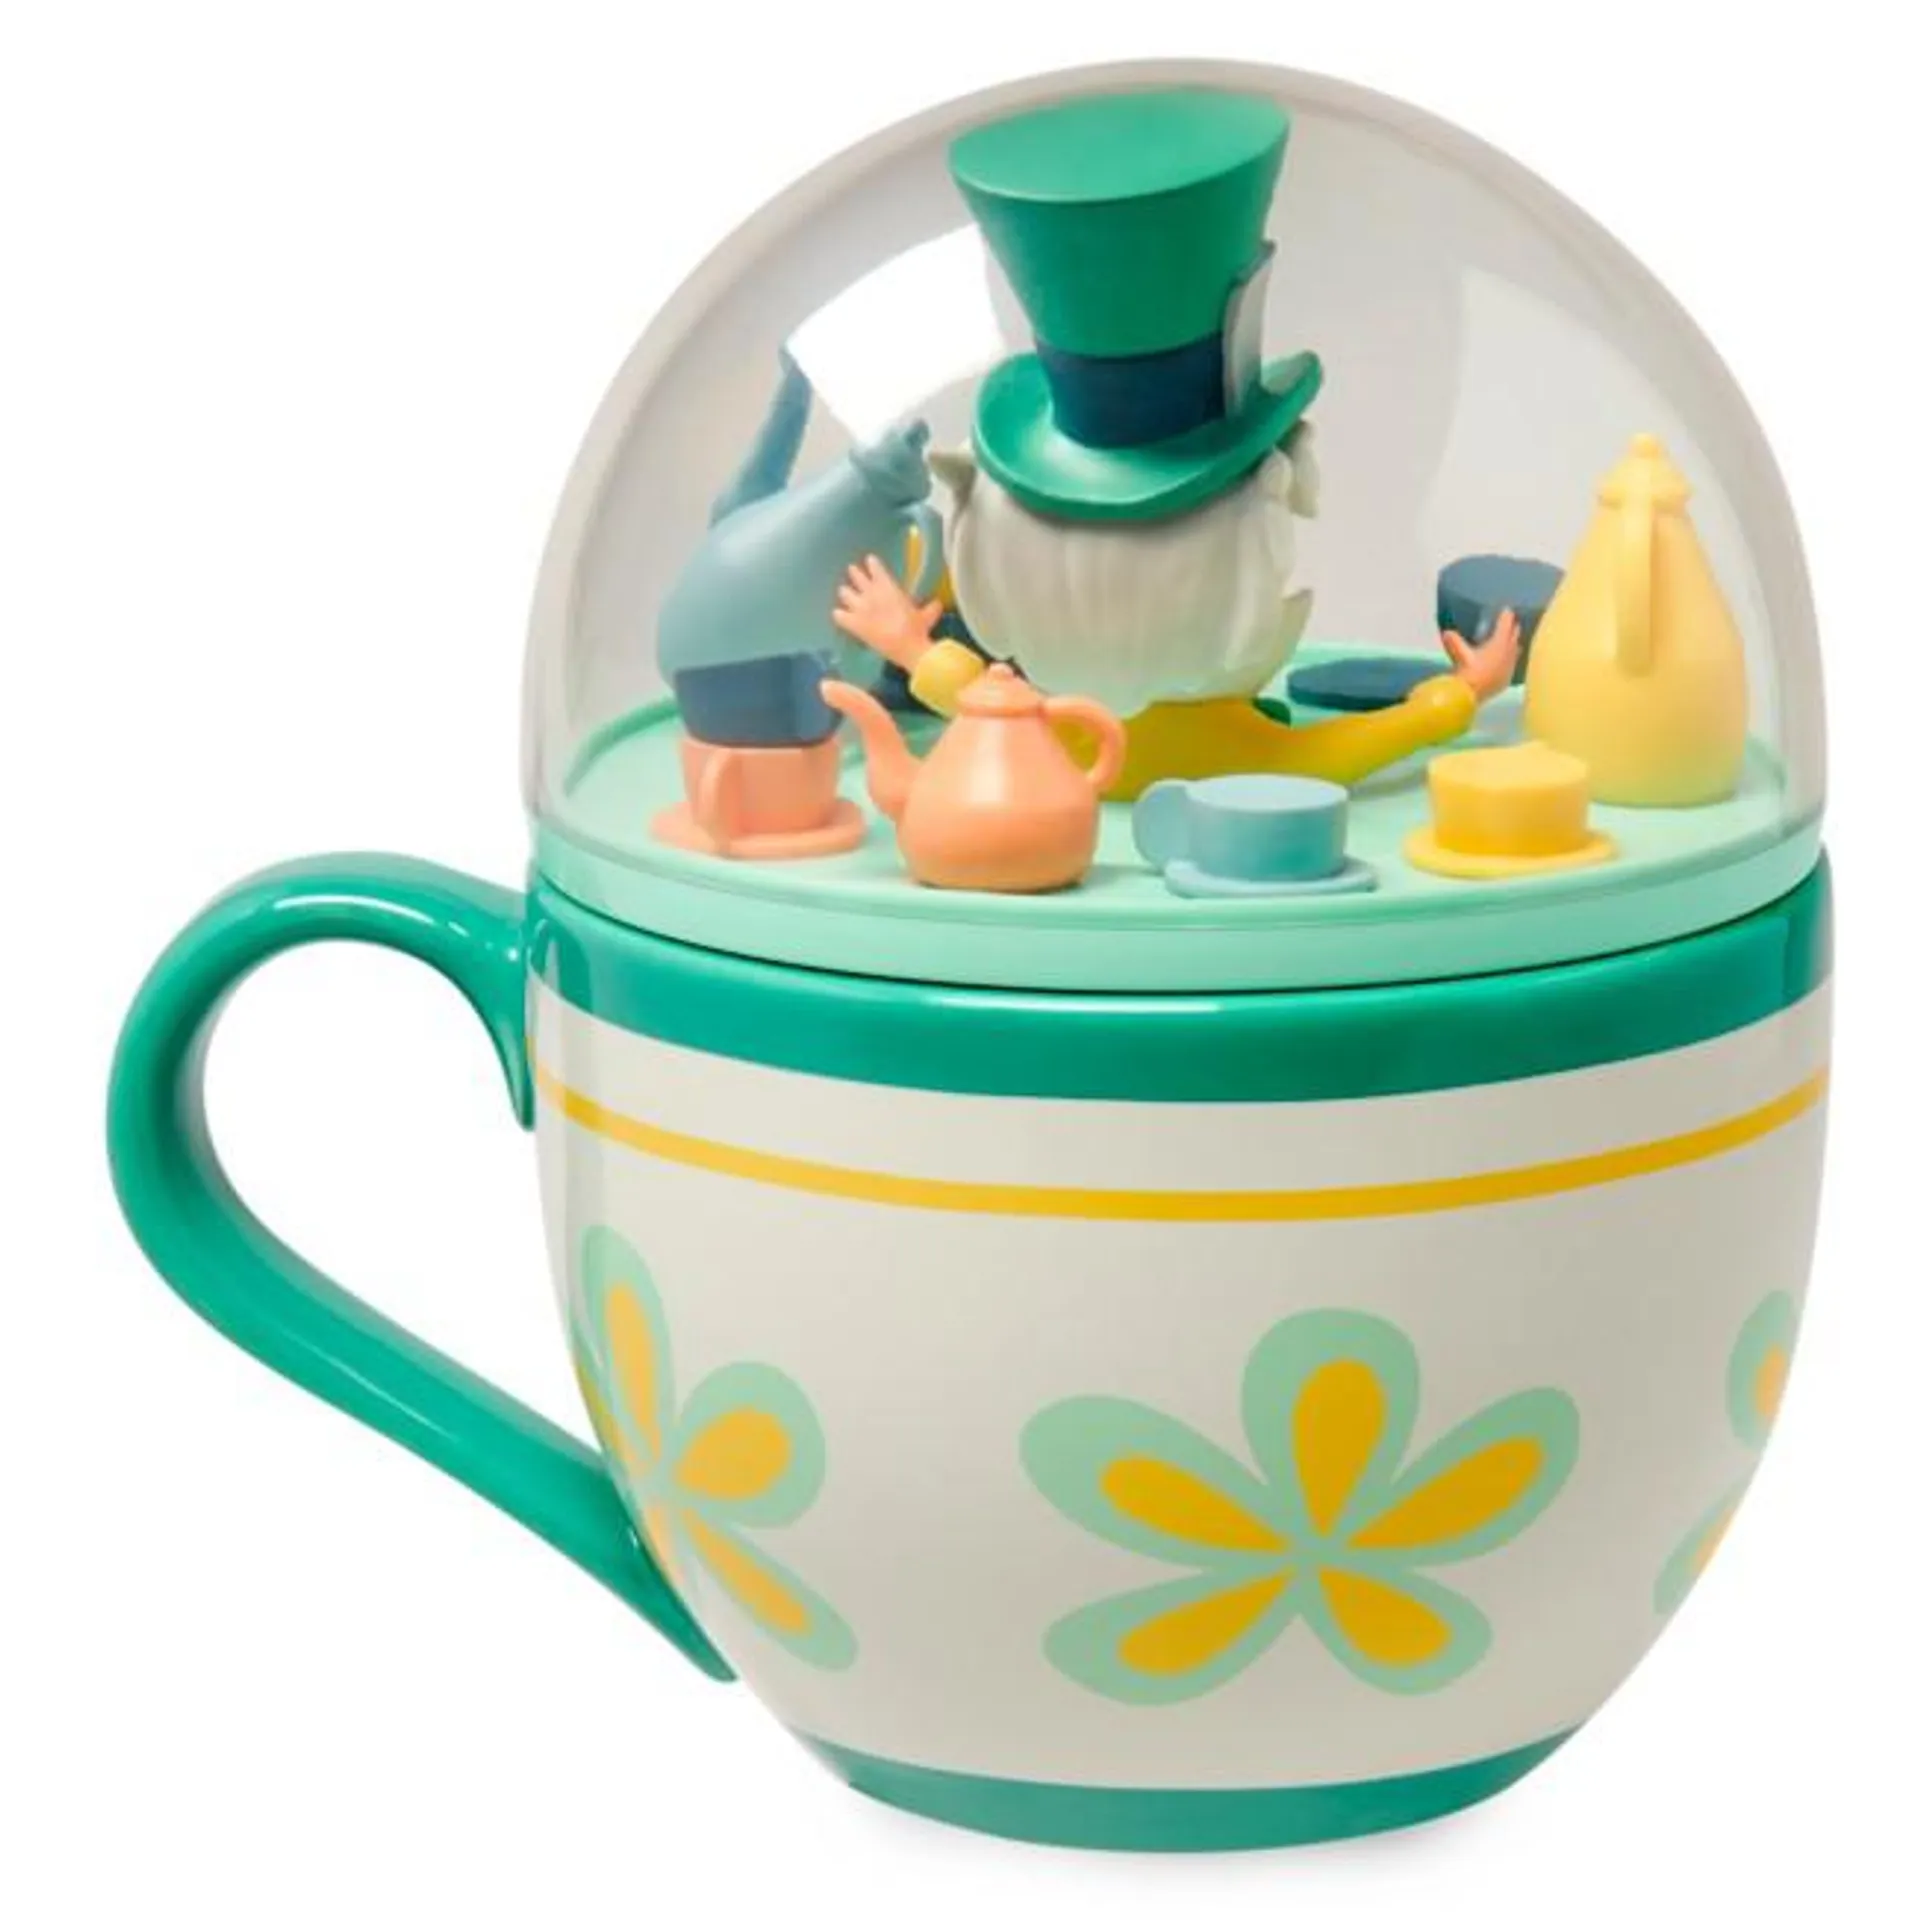 Disney Store Mad Hatter Alice in Wonderland Mad Tea Party Mug with Lid